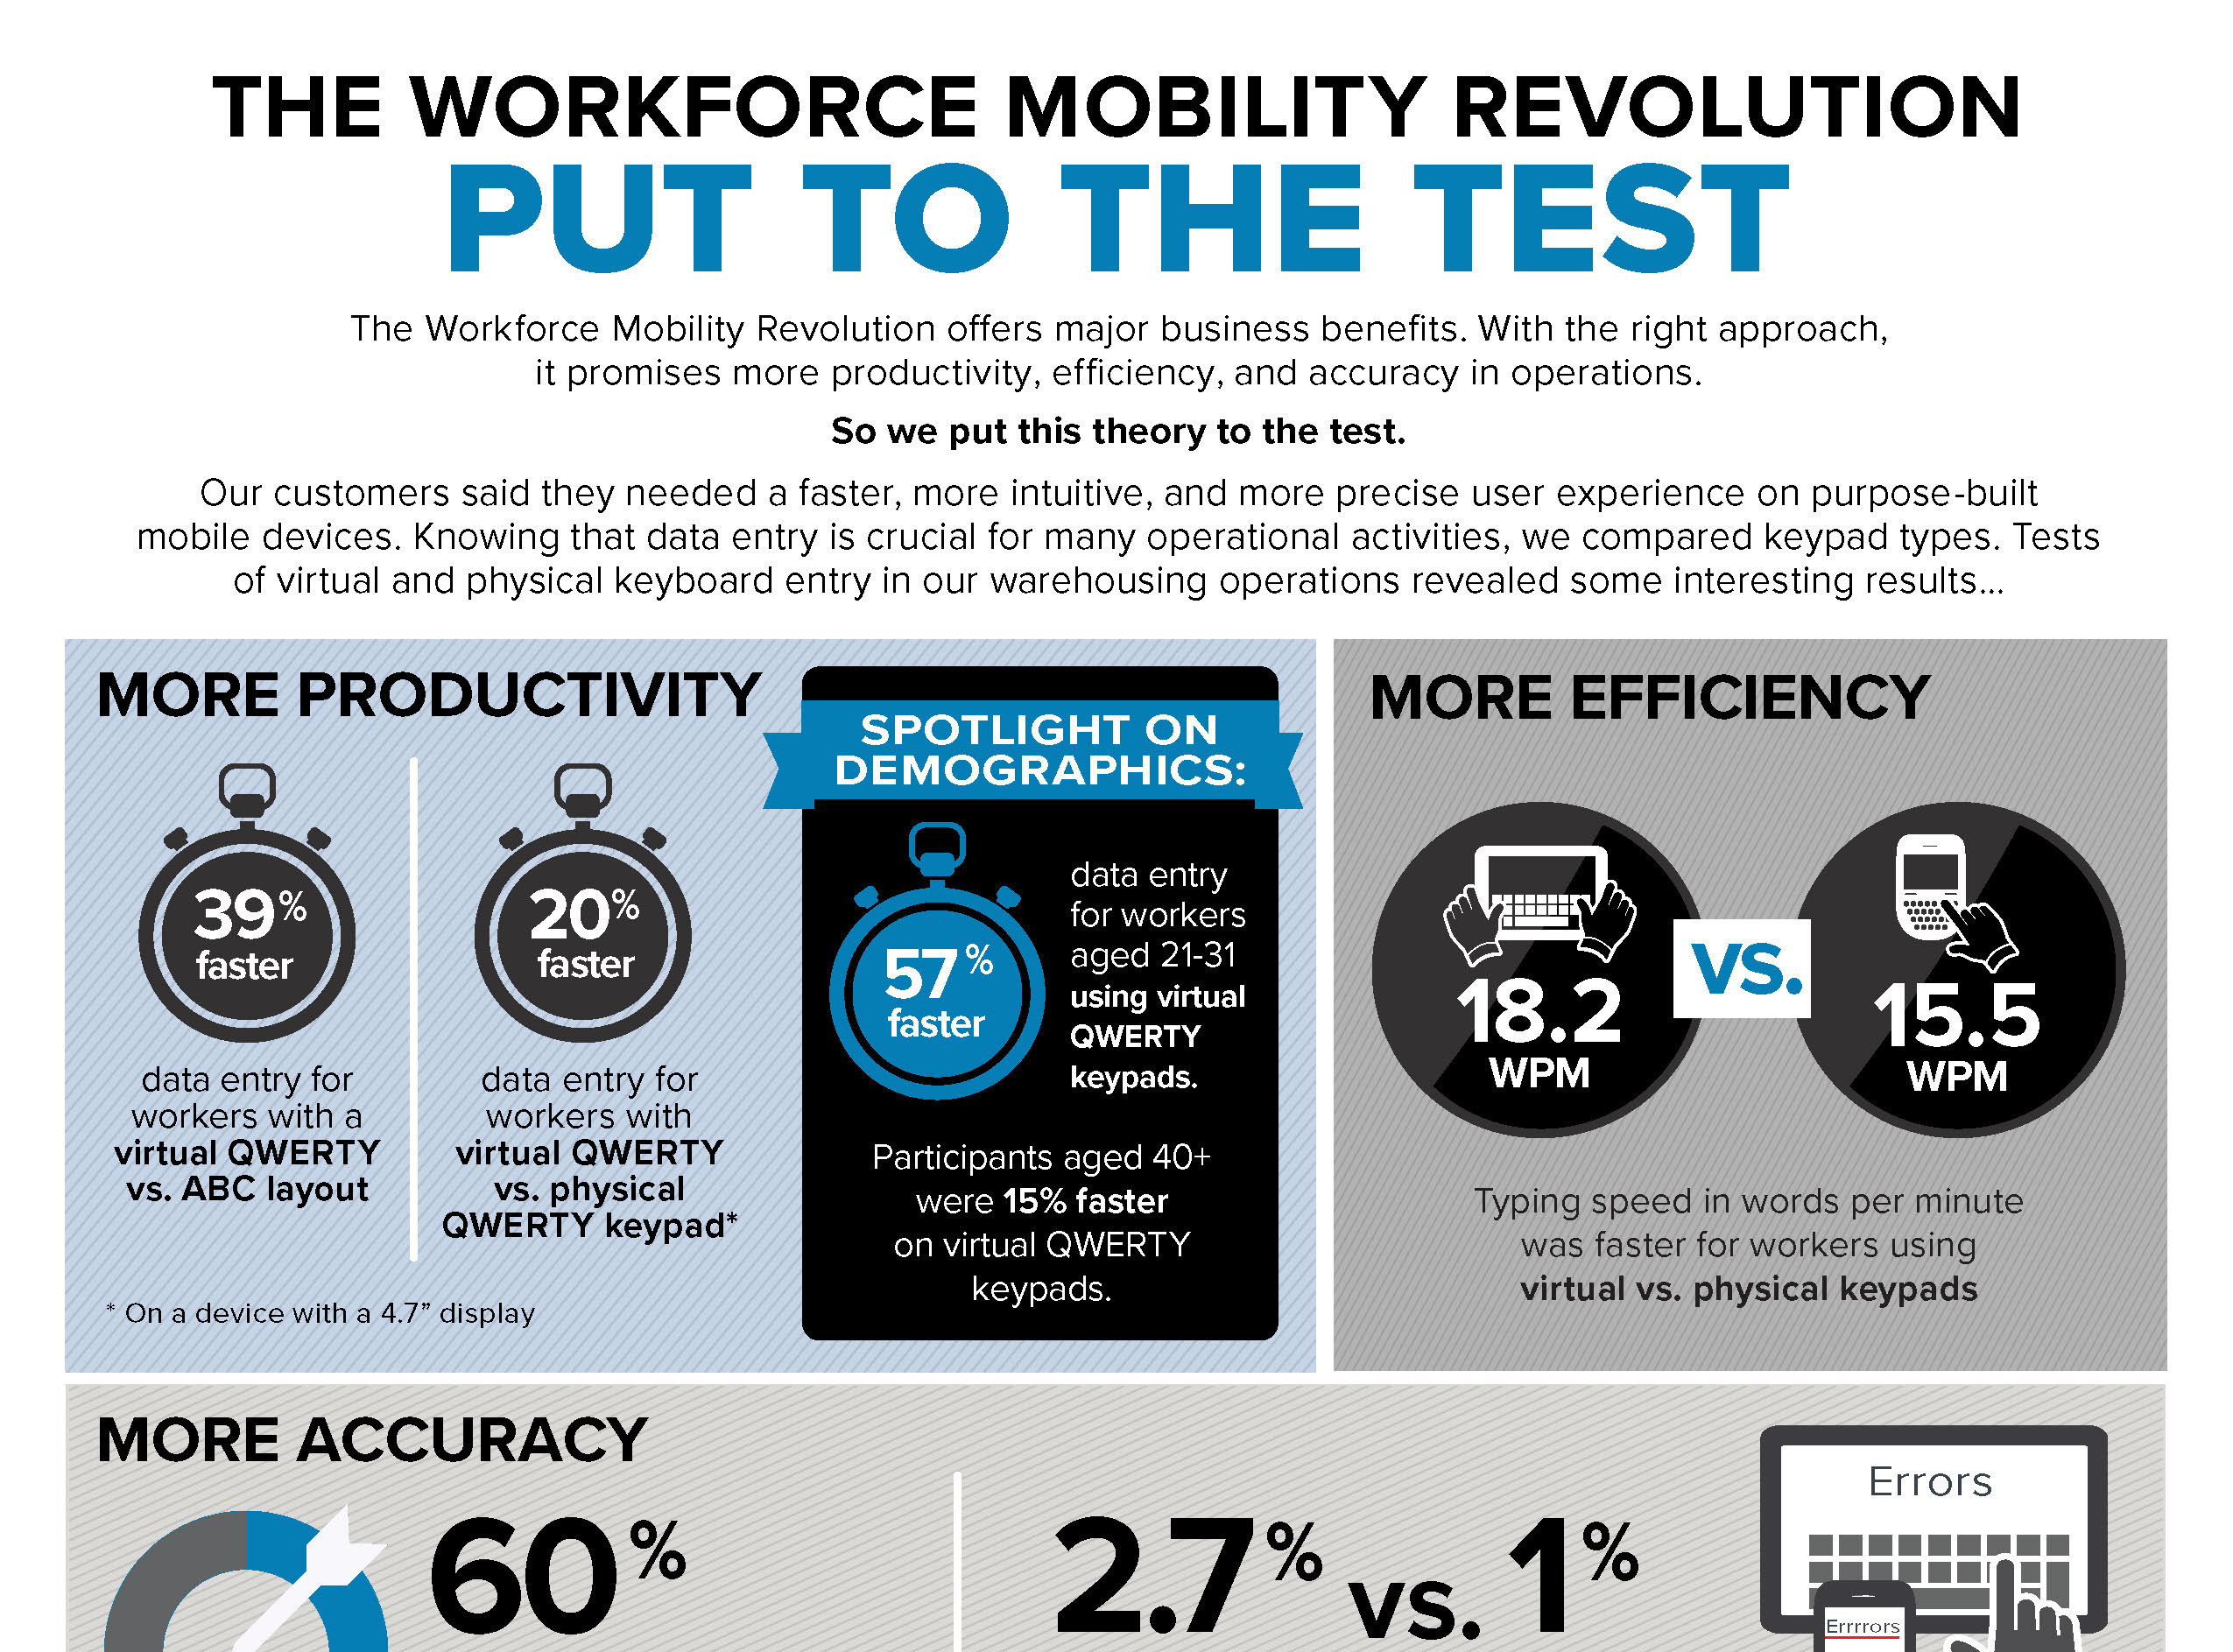 THE WORKFORCE MOBILITY REVOLUTION PUT TO THE TEST The SMS Group